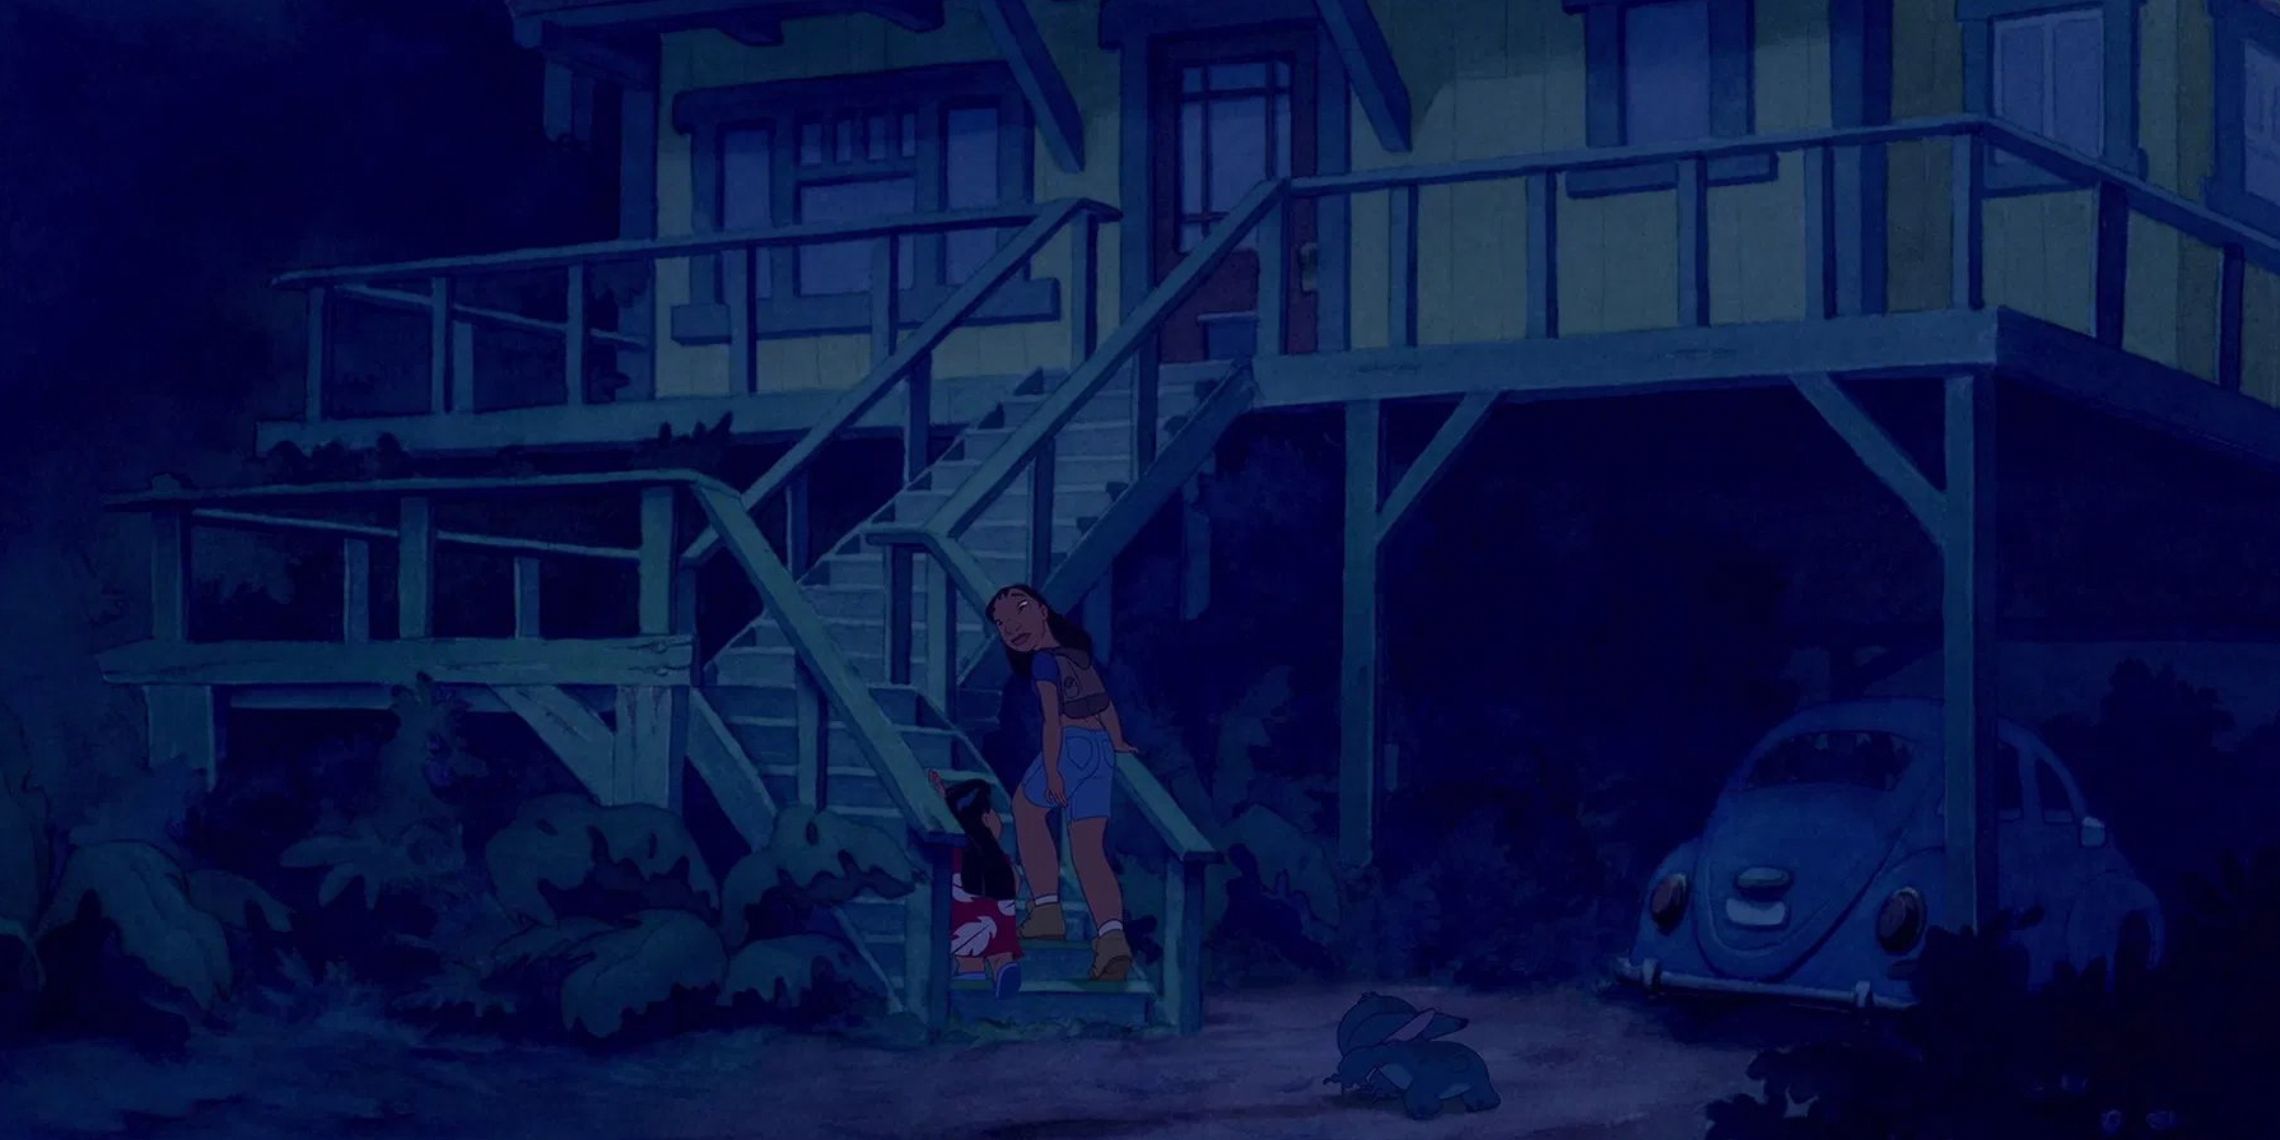 Nani talks to Lilo while walking up the steps to their house in Lilo and Stitch